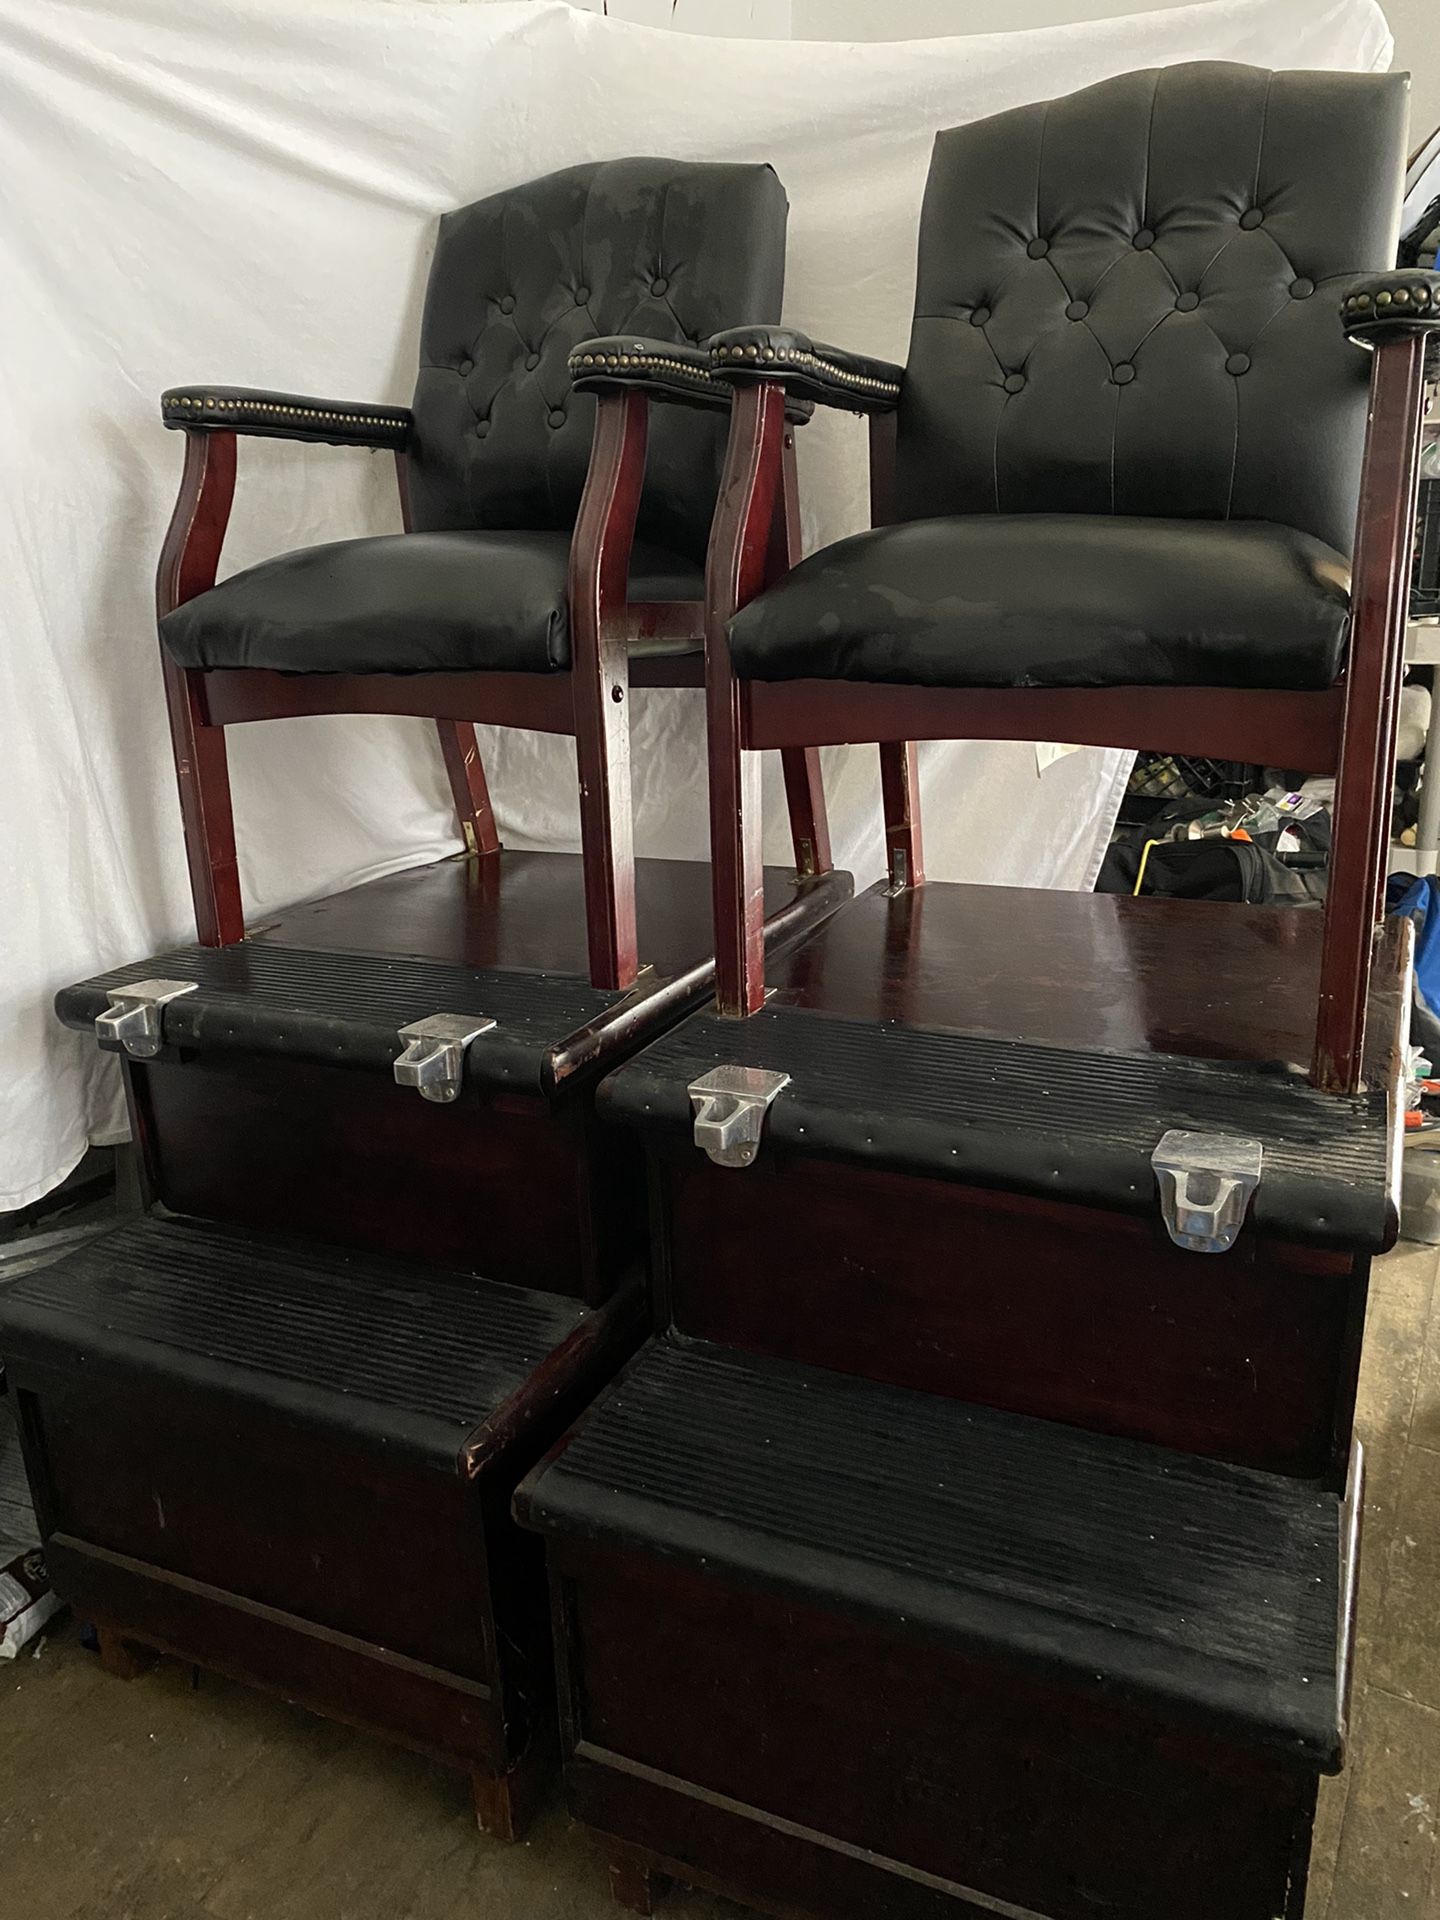 2 Vintage Portable Shoe Shine Station Kits and Accessories 